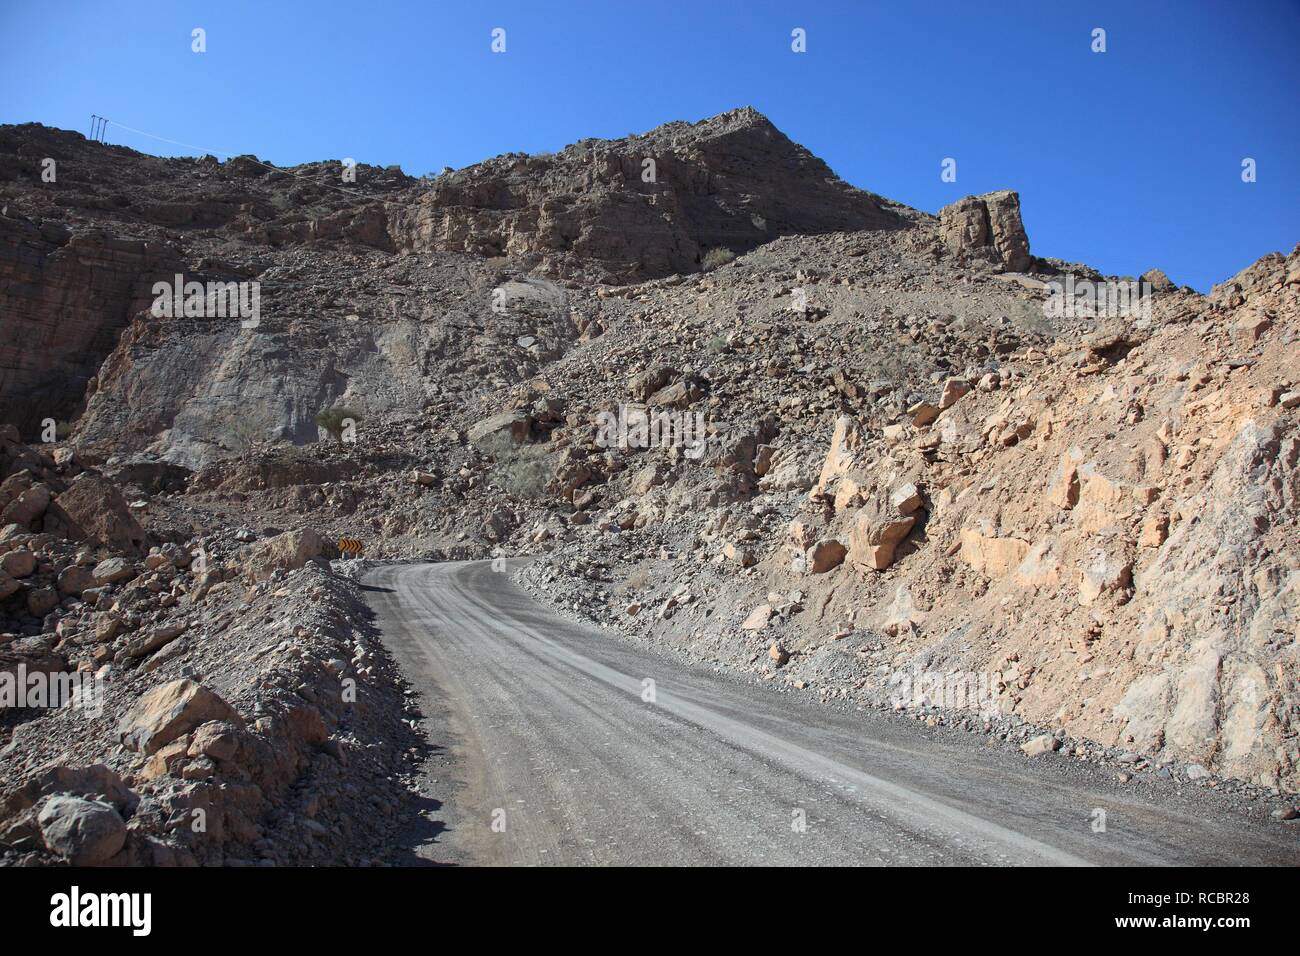 Landscape in the Jebel Harim region, in the Omani enclave of Musandam, Oman, Middle East, Asia Stock Photo